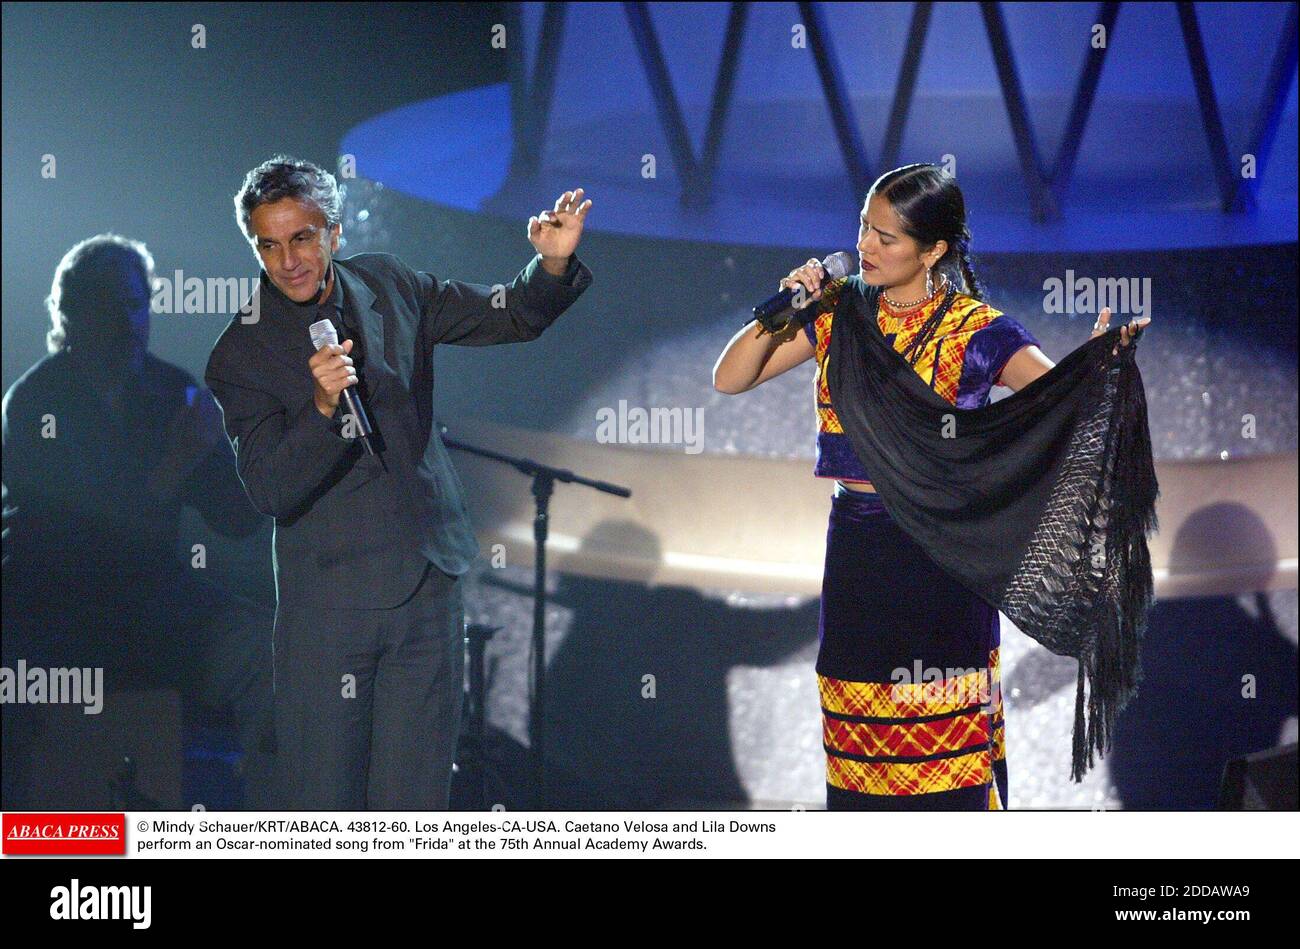 NO FILM, NO VIDEO, NO TV, NO DOCUMENTARY - © Mindy Schauer/KRT/ABACA. 43812-60. Los Angeles-CA-USA. 23/03/03. Caetano Veloso and Lila Downs perform an Oscar-nominated song from Frida at the 75th Annual Academy Awards. Stock Photo